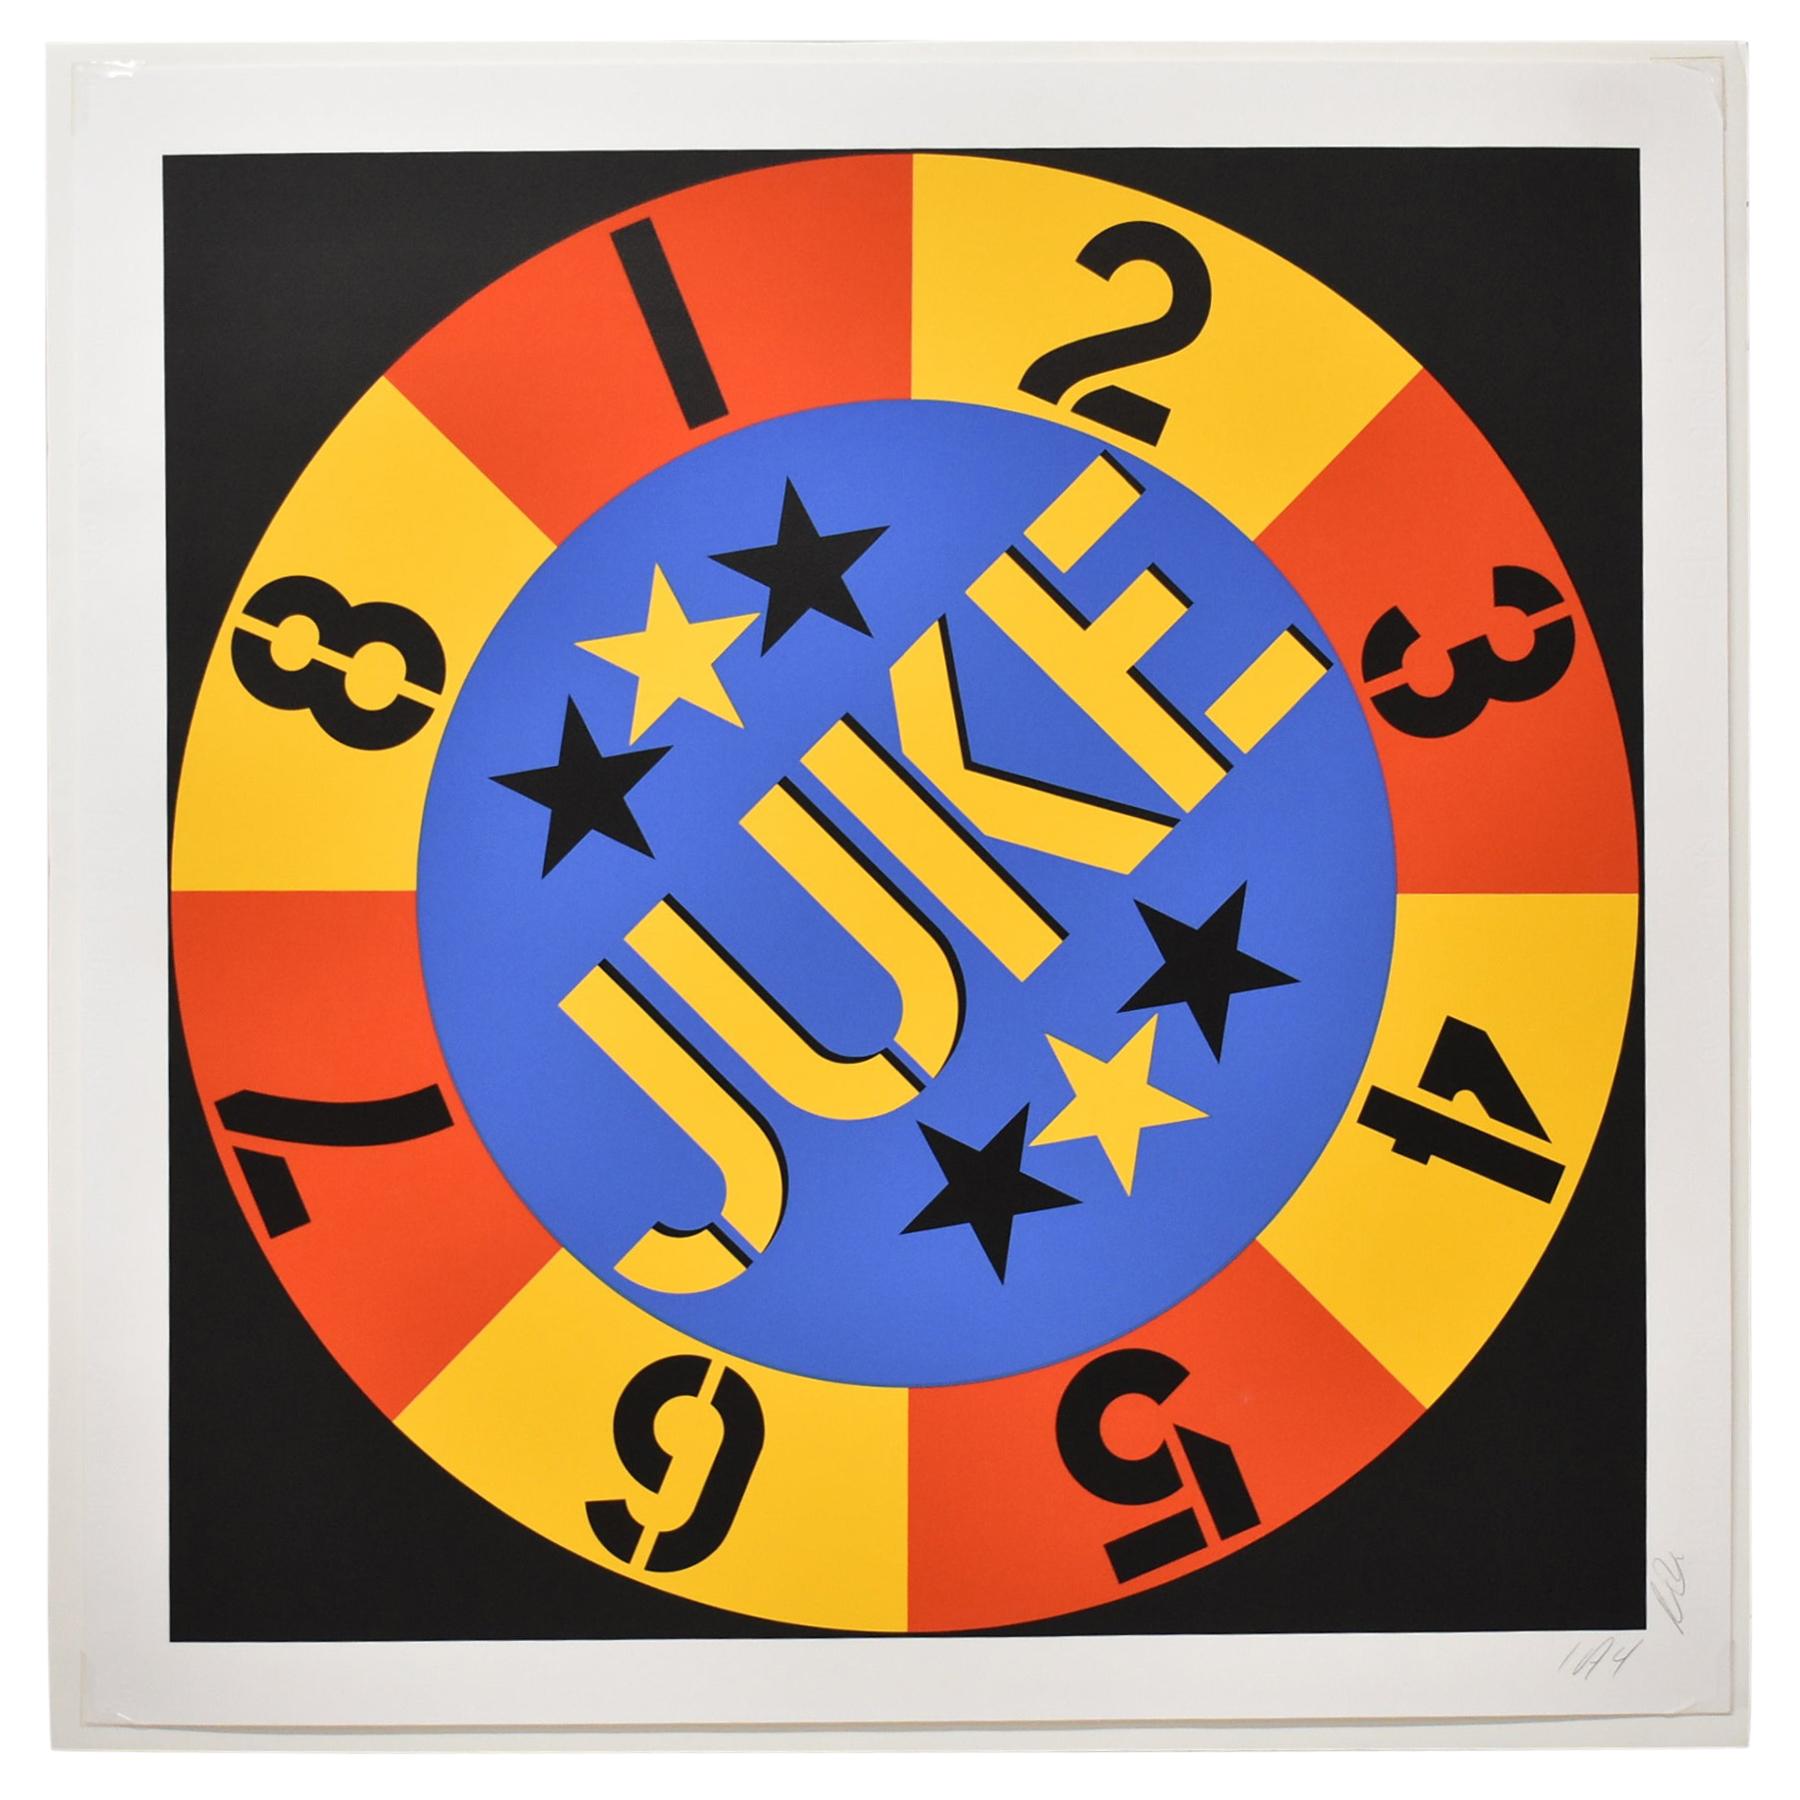 Robert Indiana Screen Print "Juke" 1 of 4 Signed in Pencil on Wove Paper